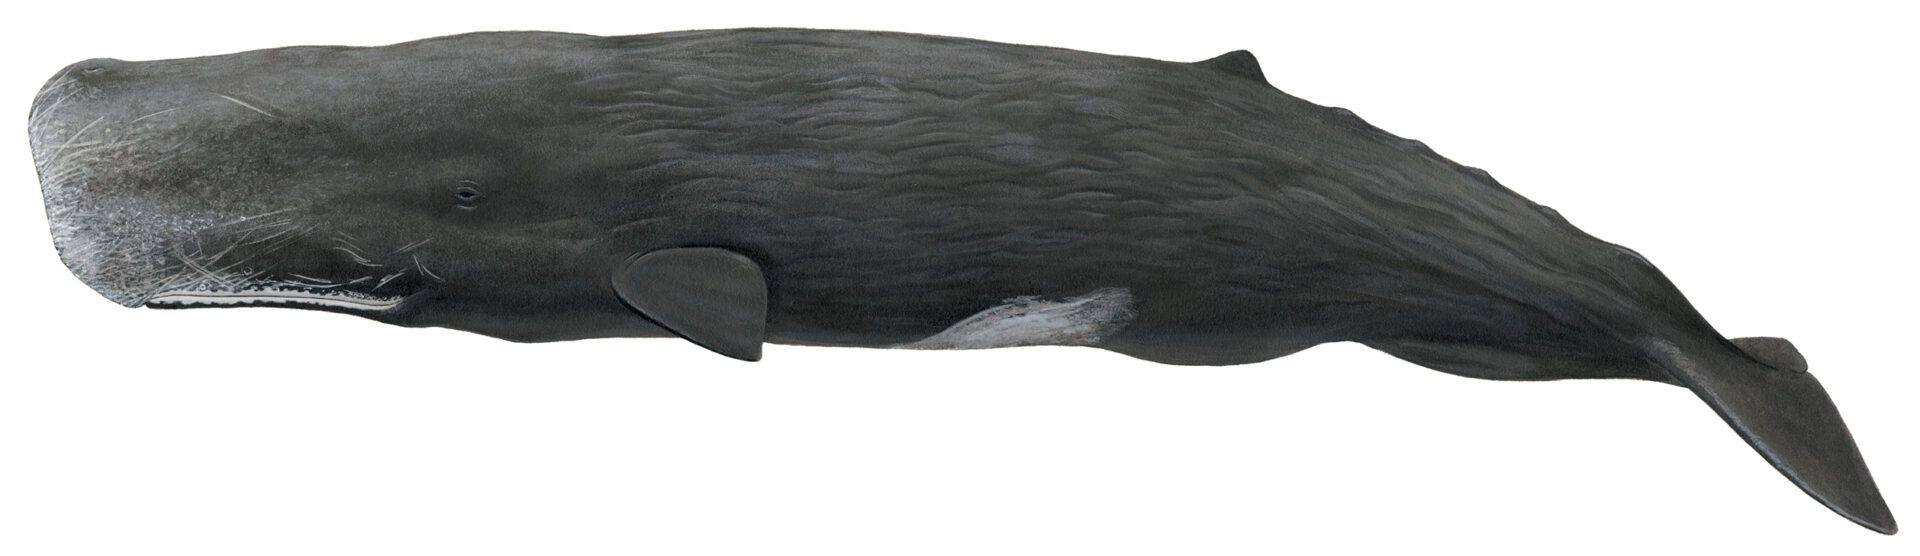 A black whale is shown with its mouth open.